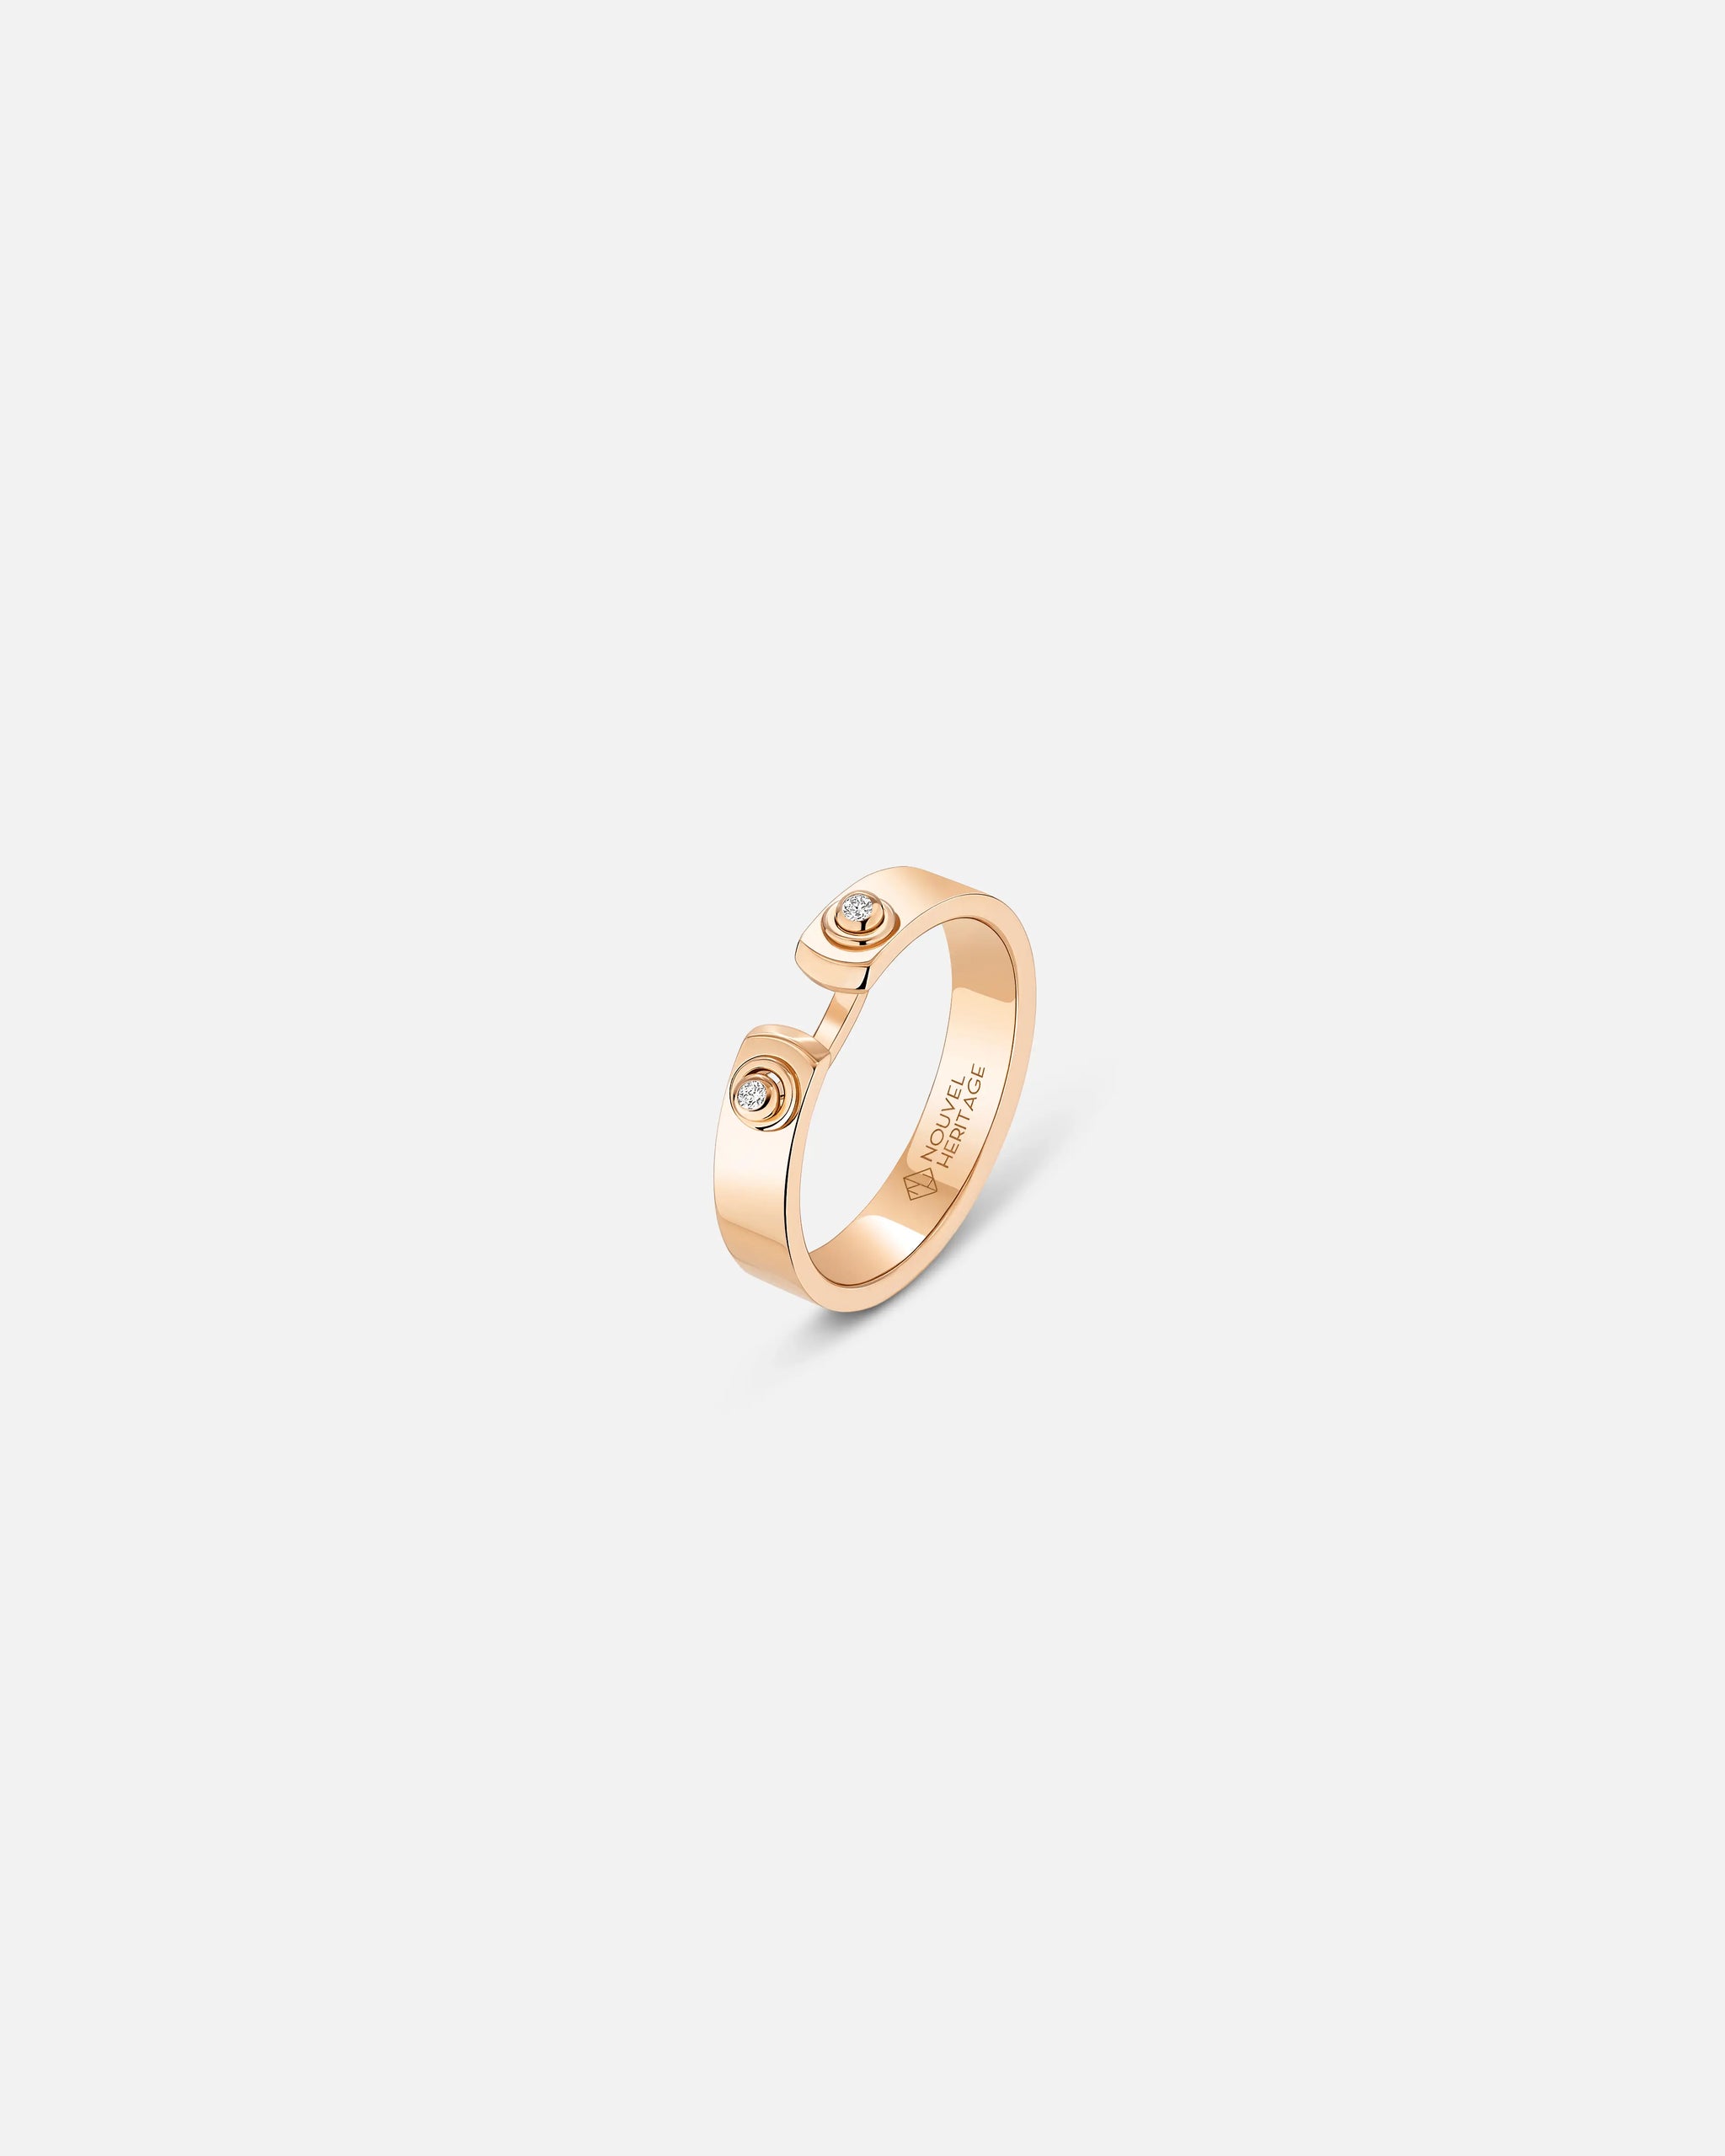 Monday Morning Mood Ring in Rose Gold - 1 - Nouvel Heritage